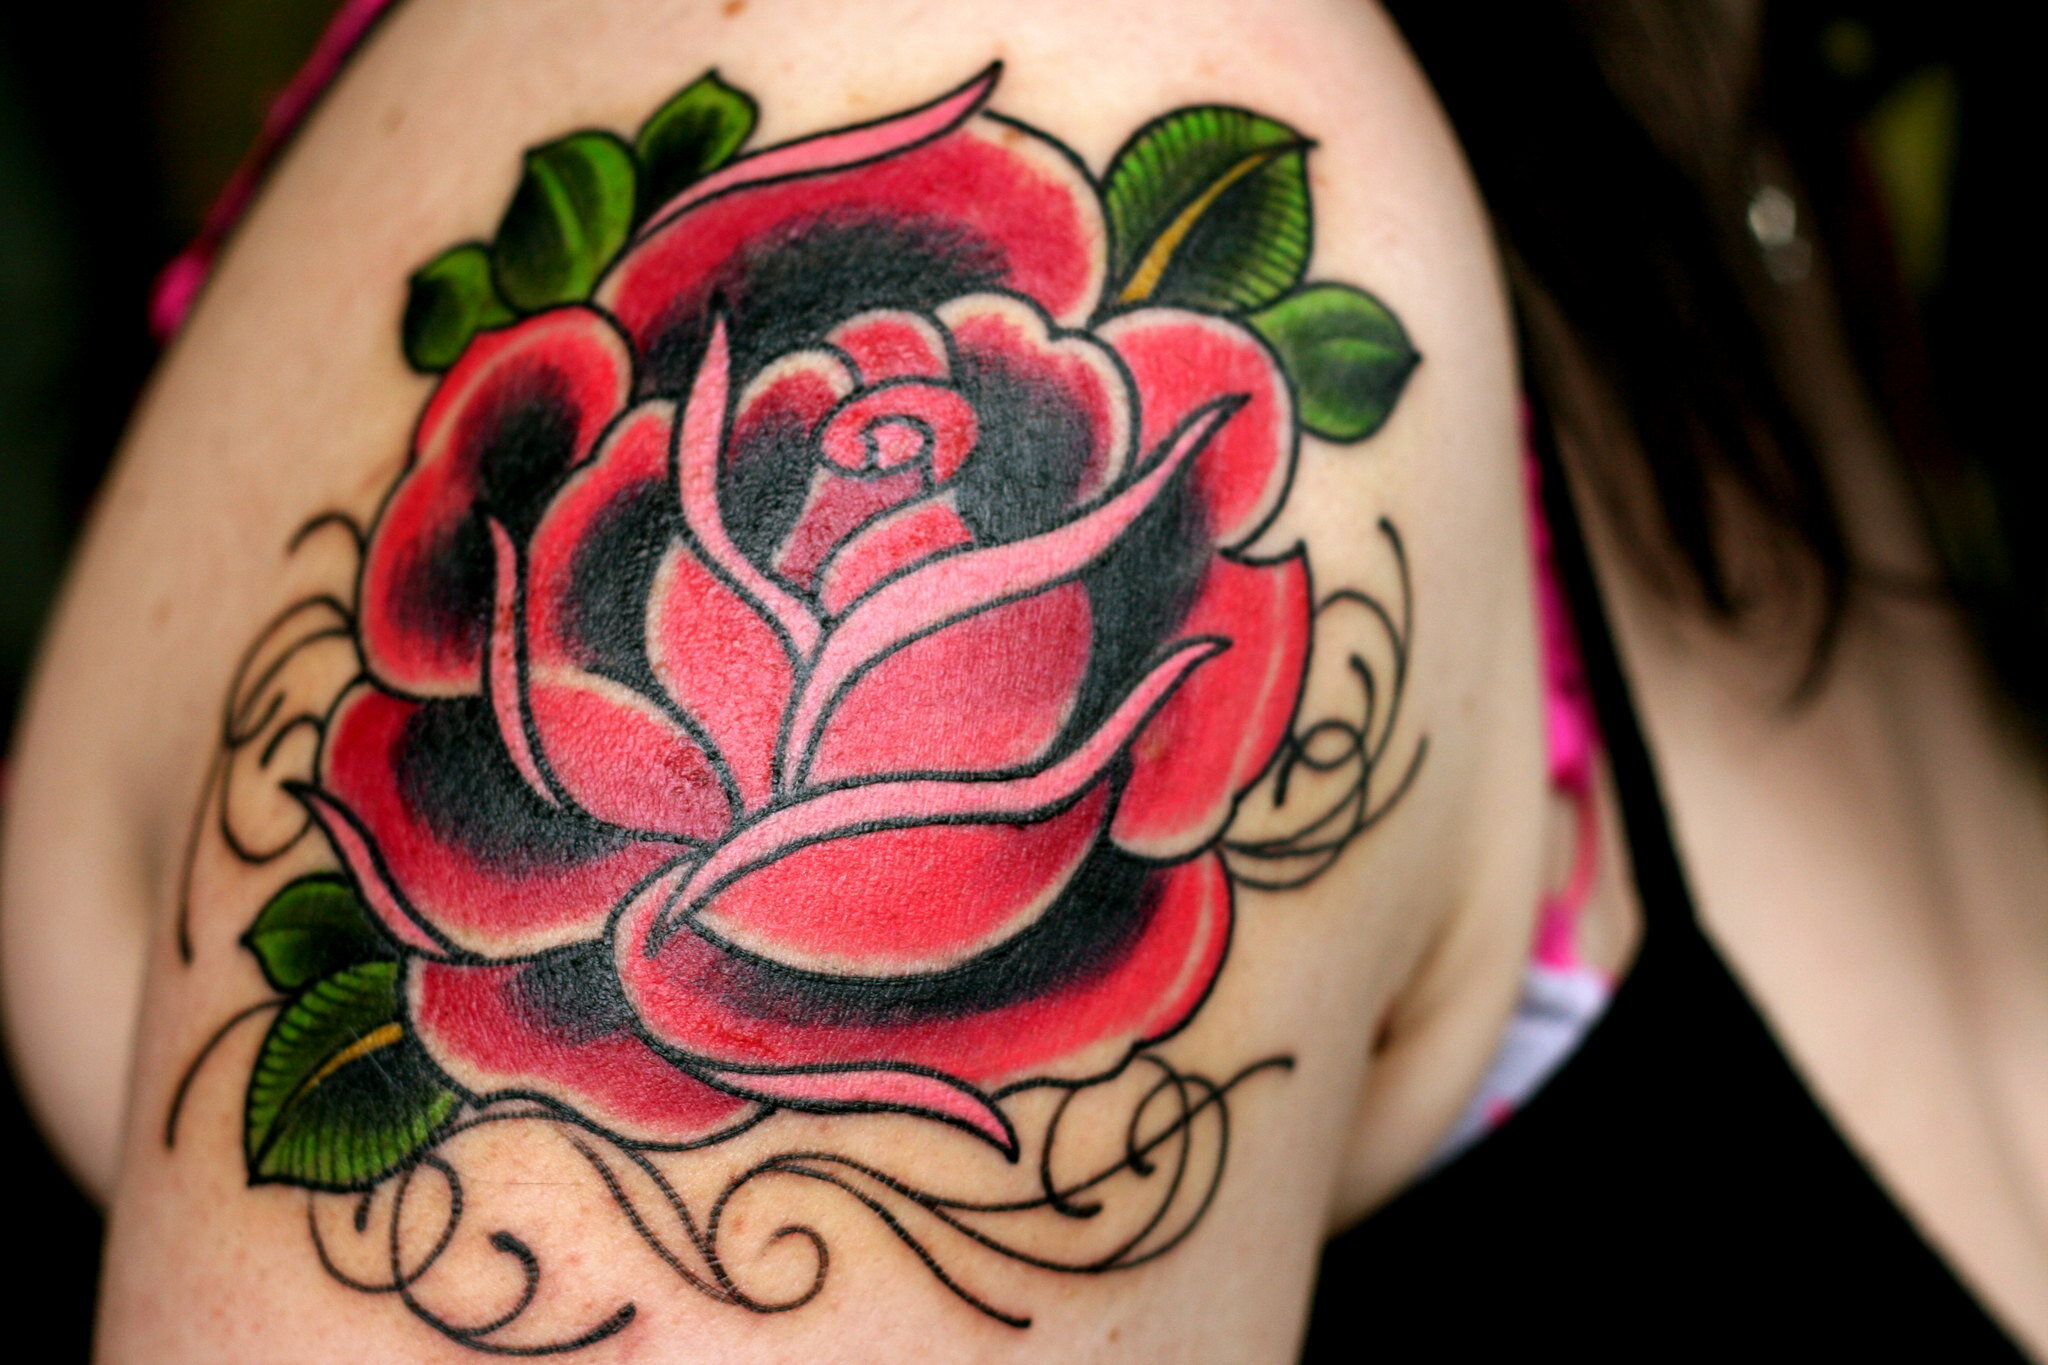 Going Skin Deep: Is a Tattoo Ethically Binding?